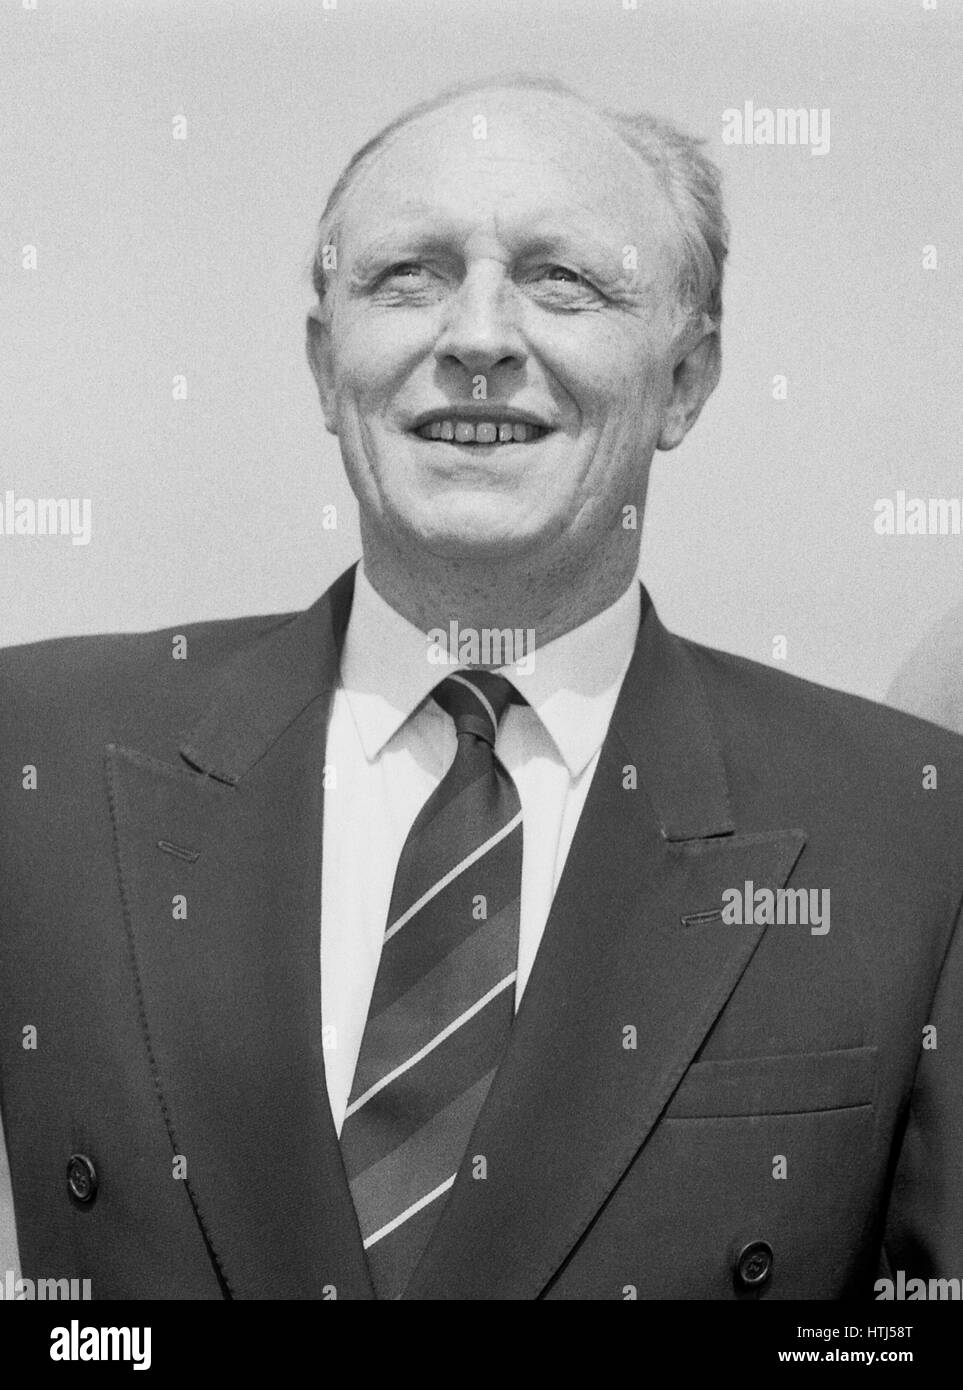 Rt. Hon. Neil Kinnock, Leader of the Labour party and Member of Parliament for Islwyn, attends a photo call on the River Thames in London, England on July 4, 1991. Stock Photo